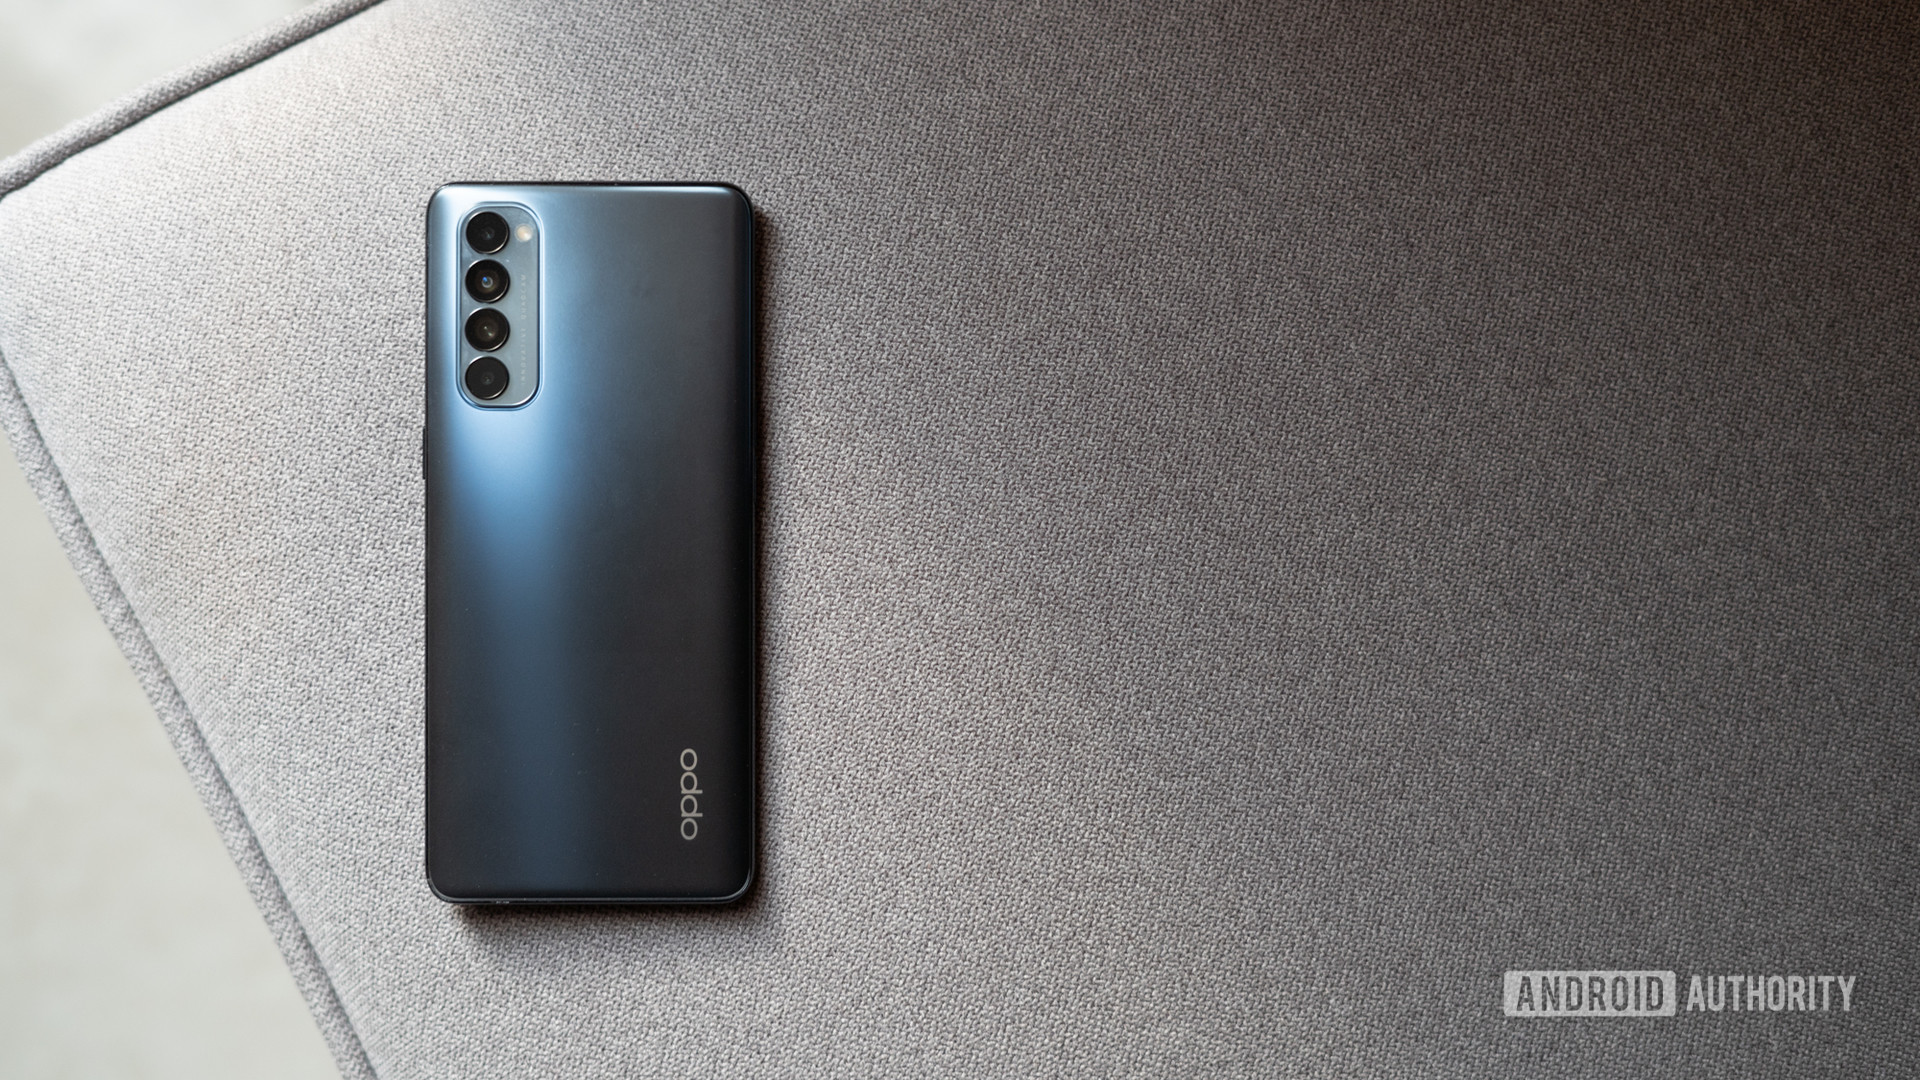 Oppo Reno showing rear back panel